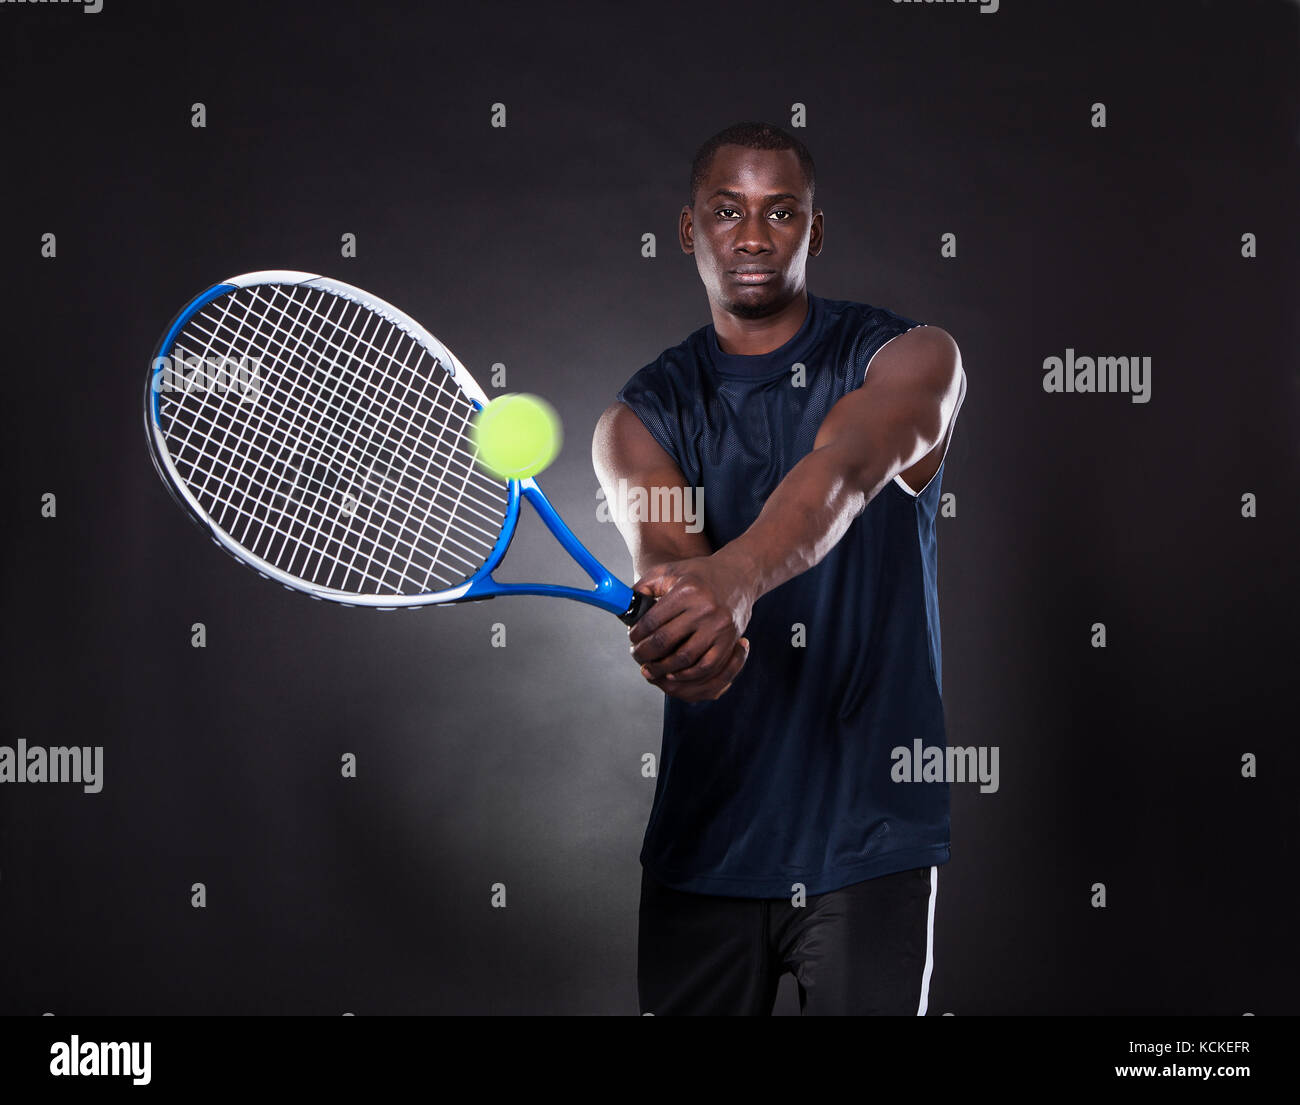 Portrait Of Young African Man Playing Tennis On Black Background Stock Photo